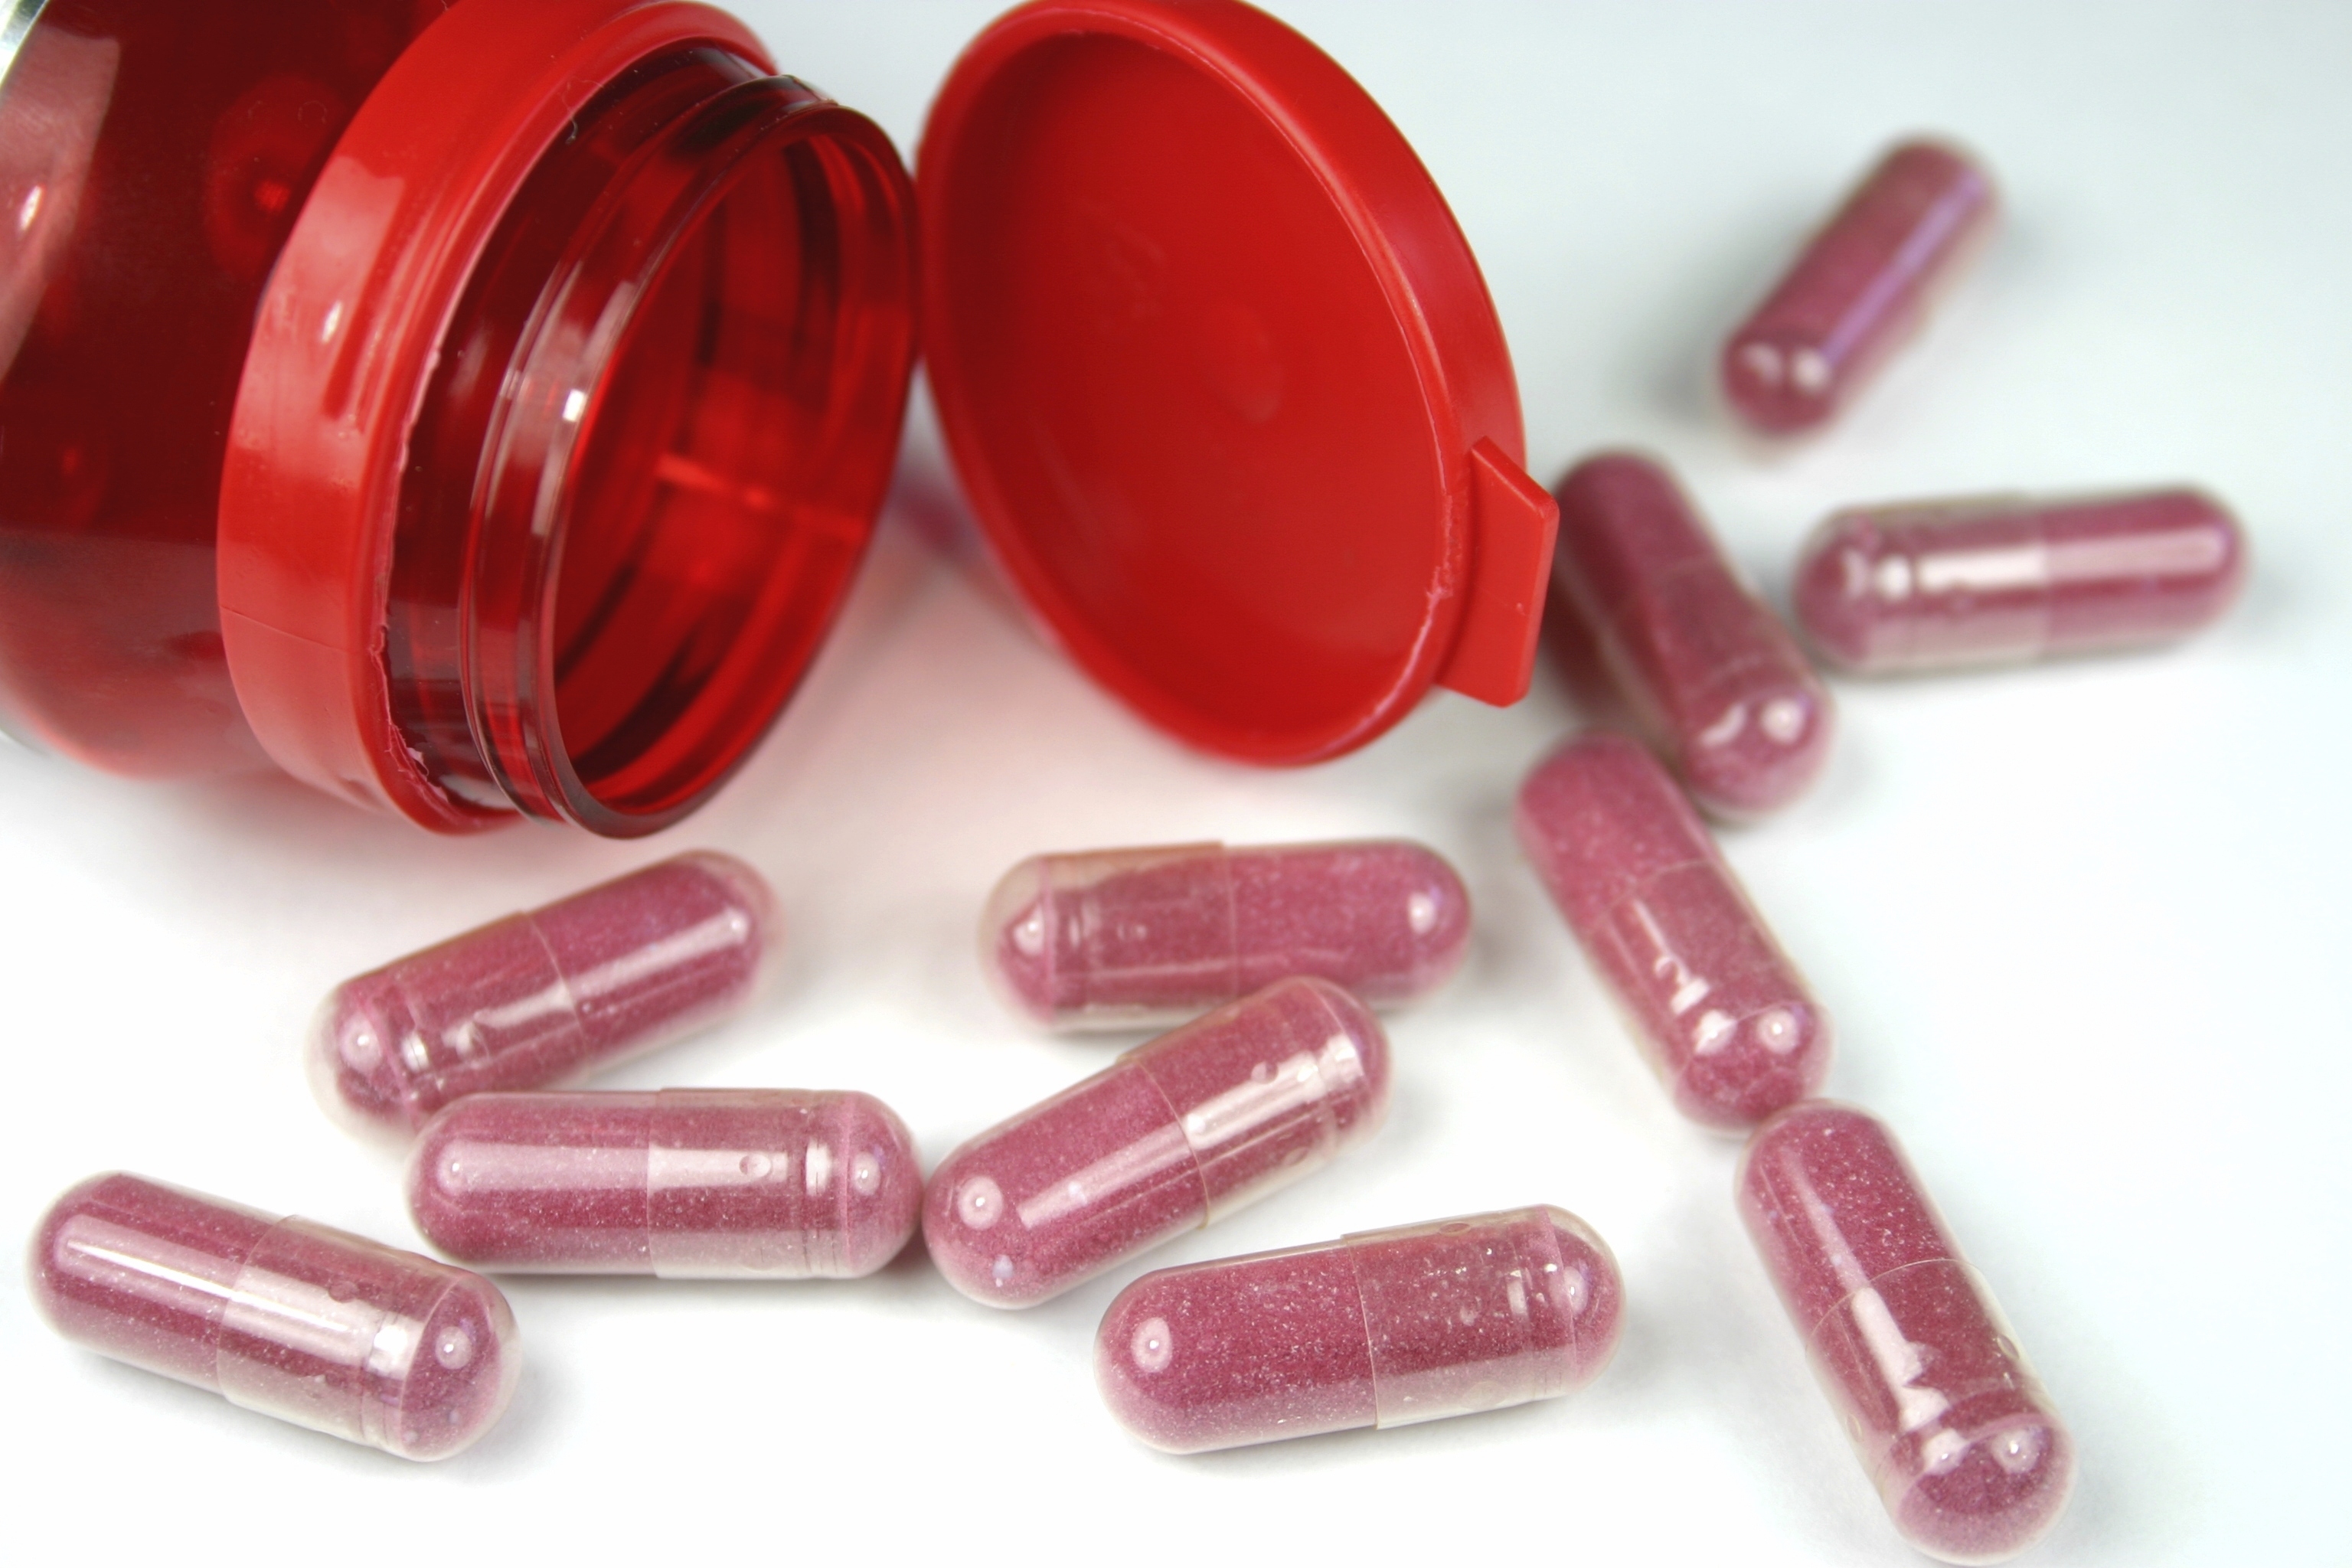 Best Cranberry Supplement For Uti